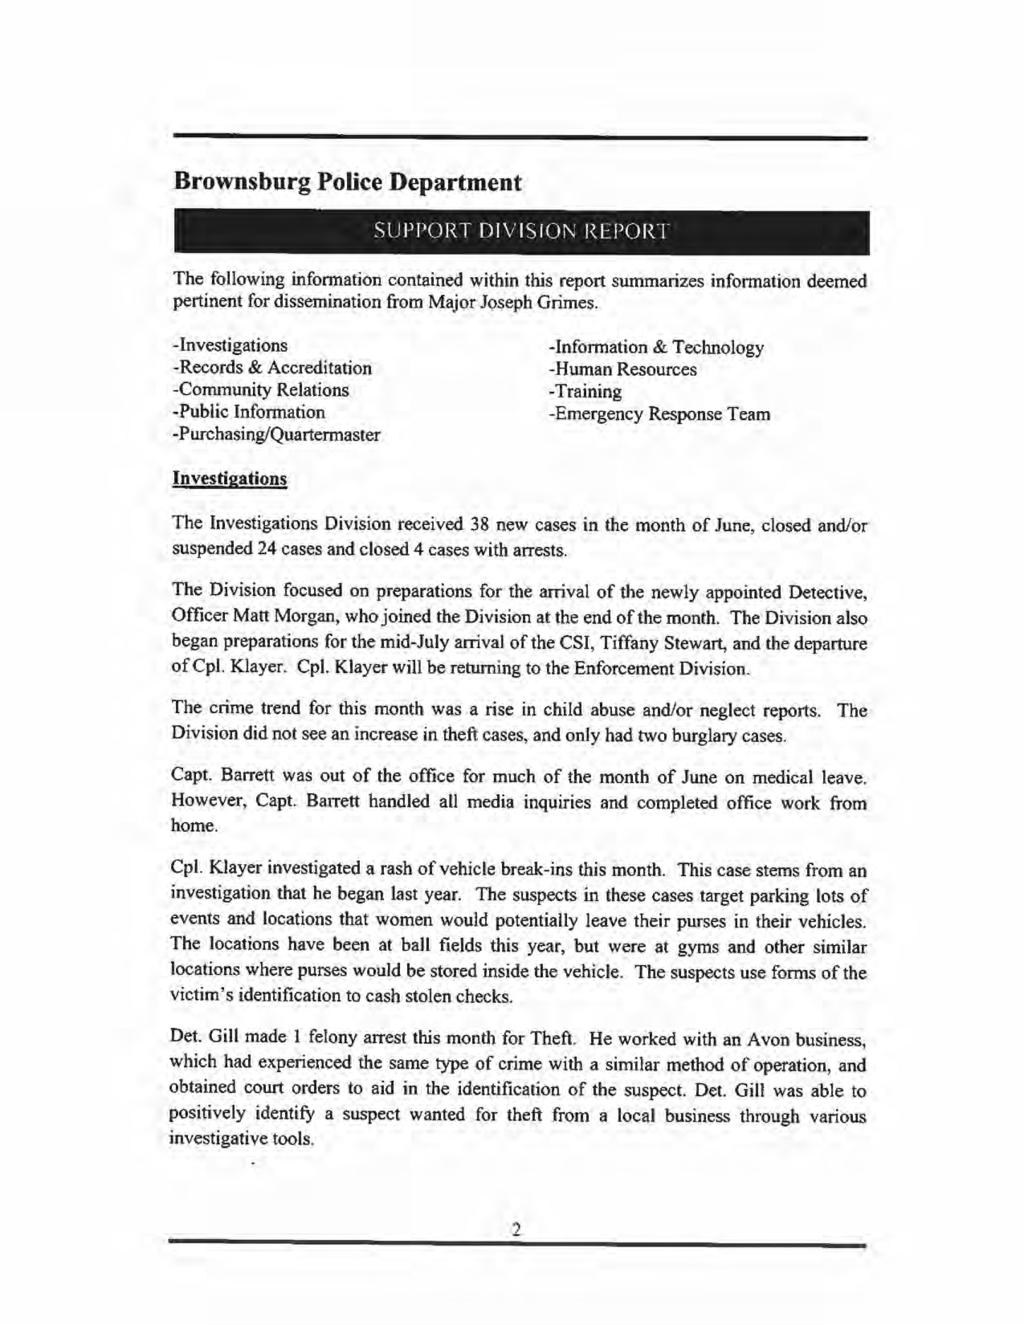 Brownsburg Police Department SLJI-' IIOIZ- I- DIVISION REPORT The following information contained within this report summarizes information deemed pertinent for dissemination from Major Joseph Grimes.